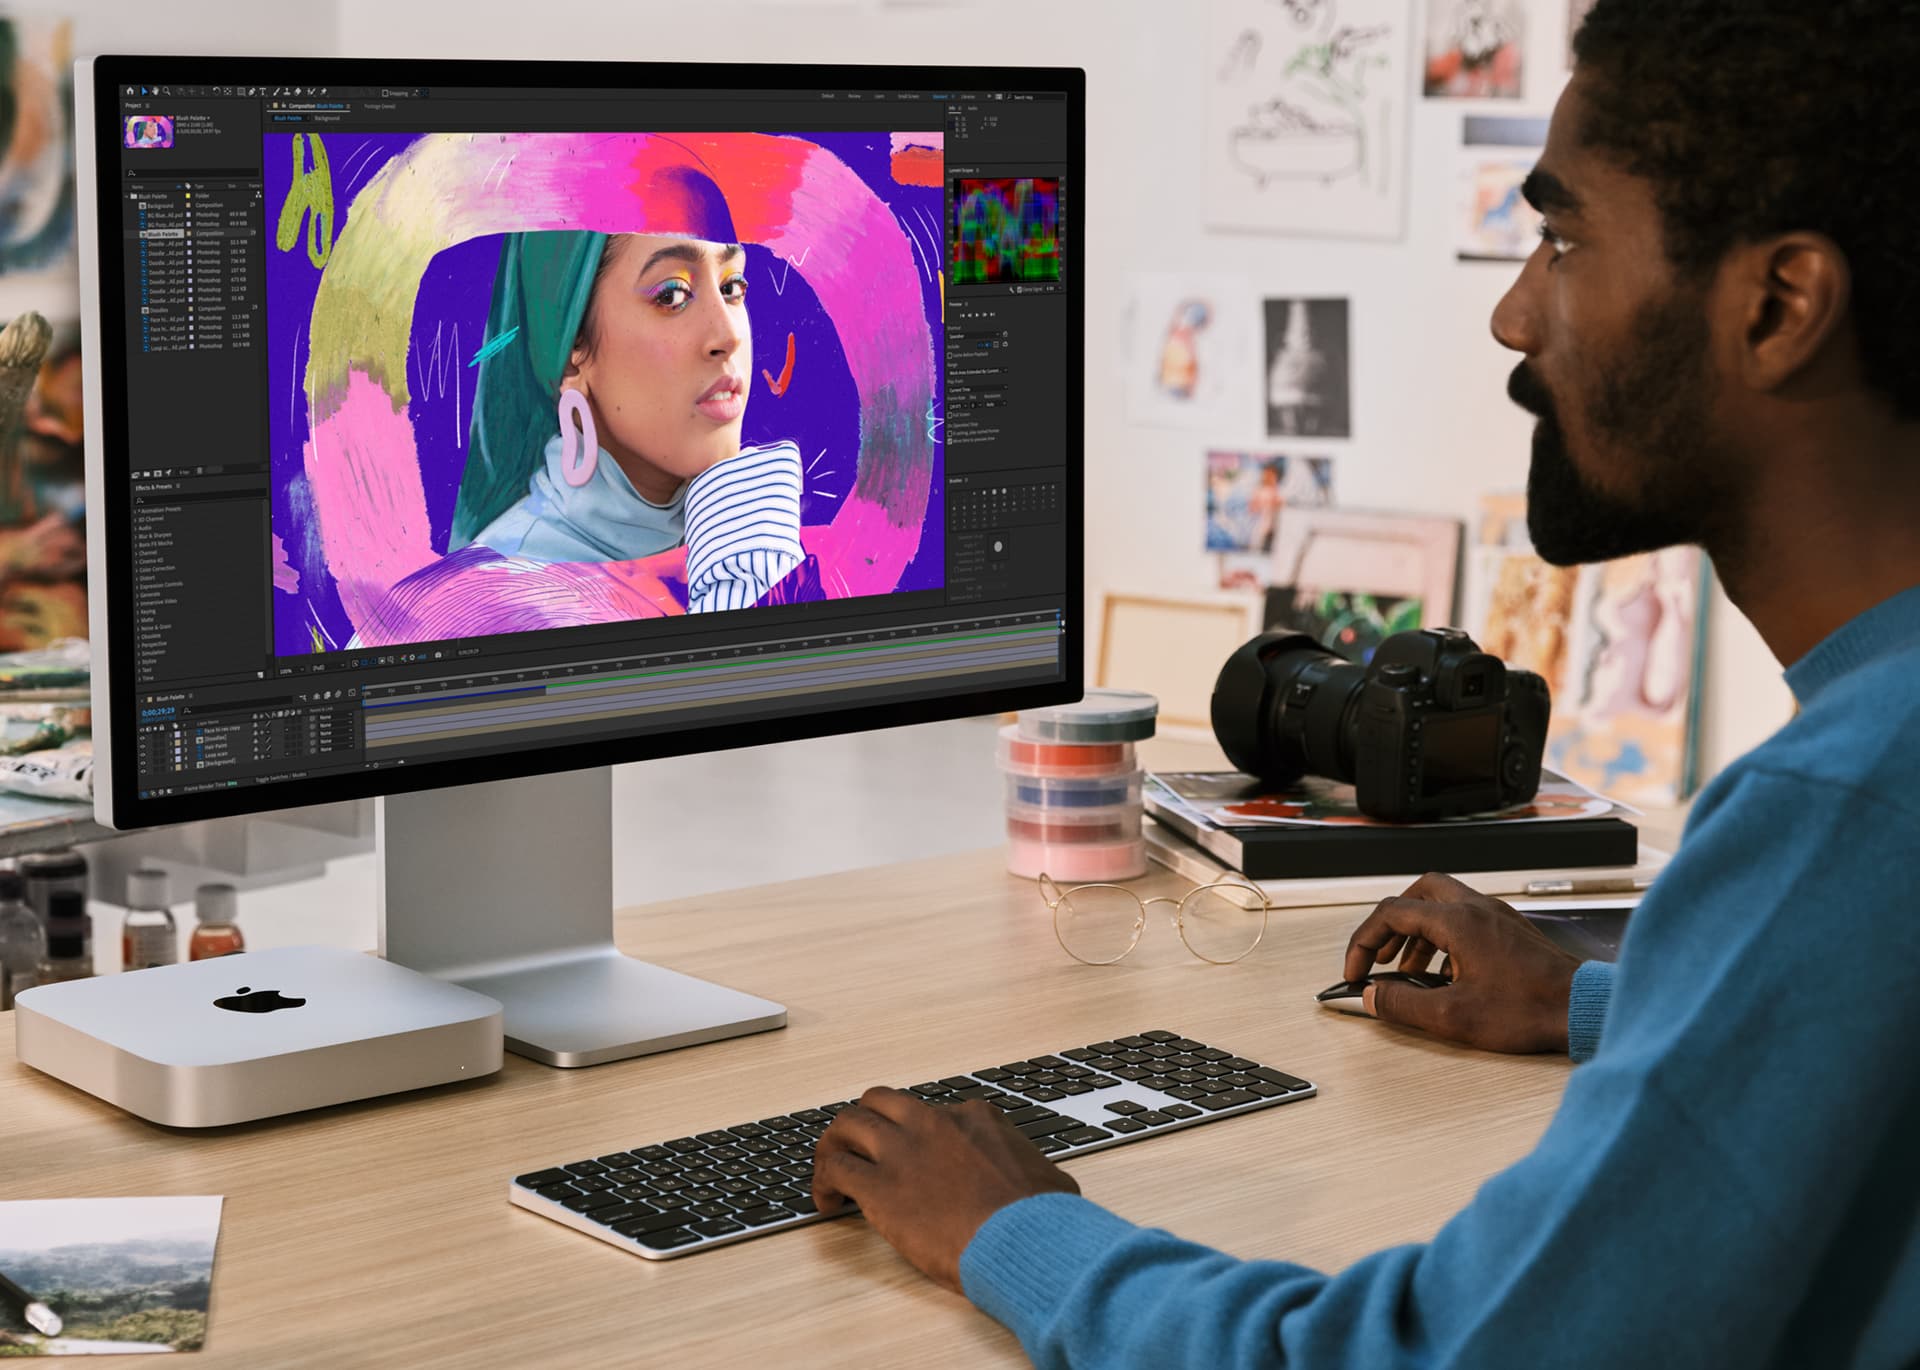 Lifestyle image showcasing a person using their M2 Mac mini and Studio Display setup to edit images 